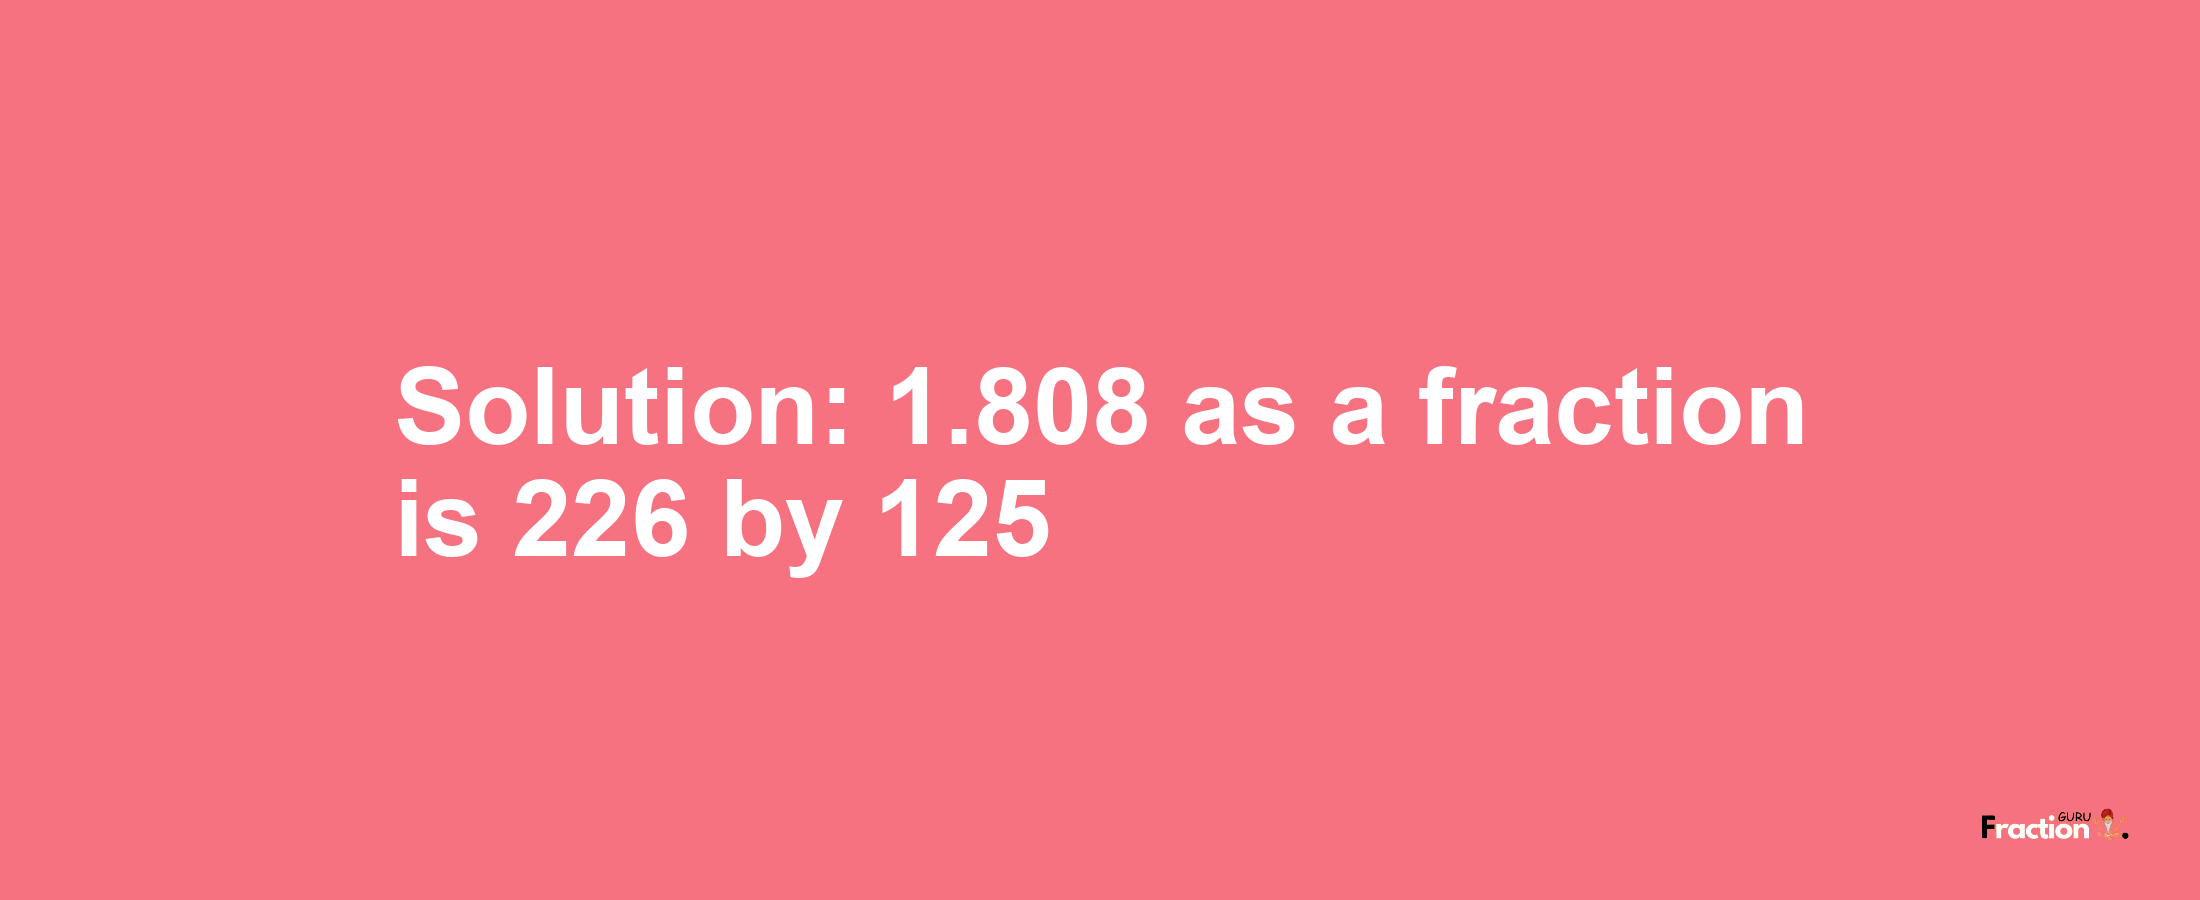 Solution:1.808 as a fraction is 226/125